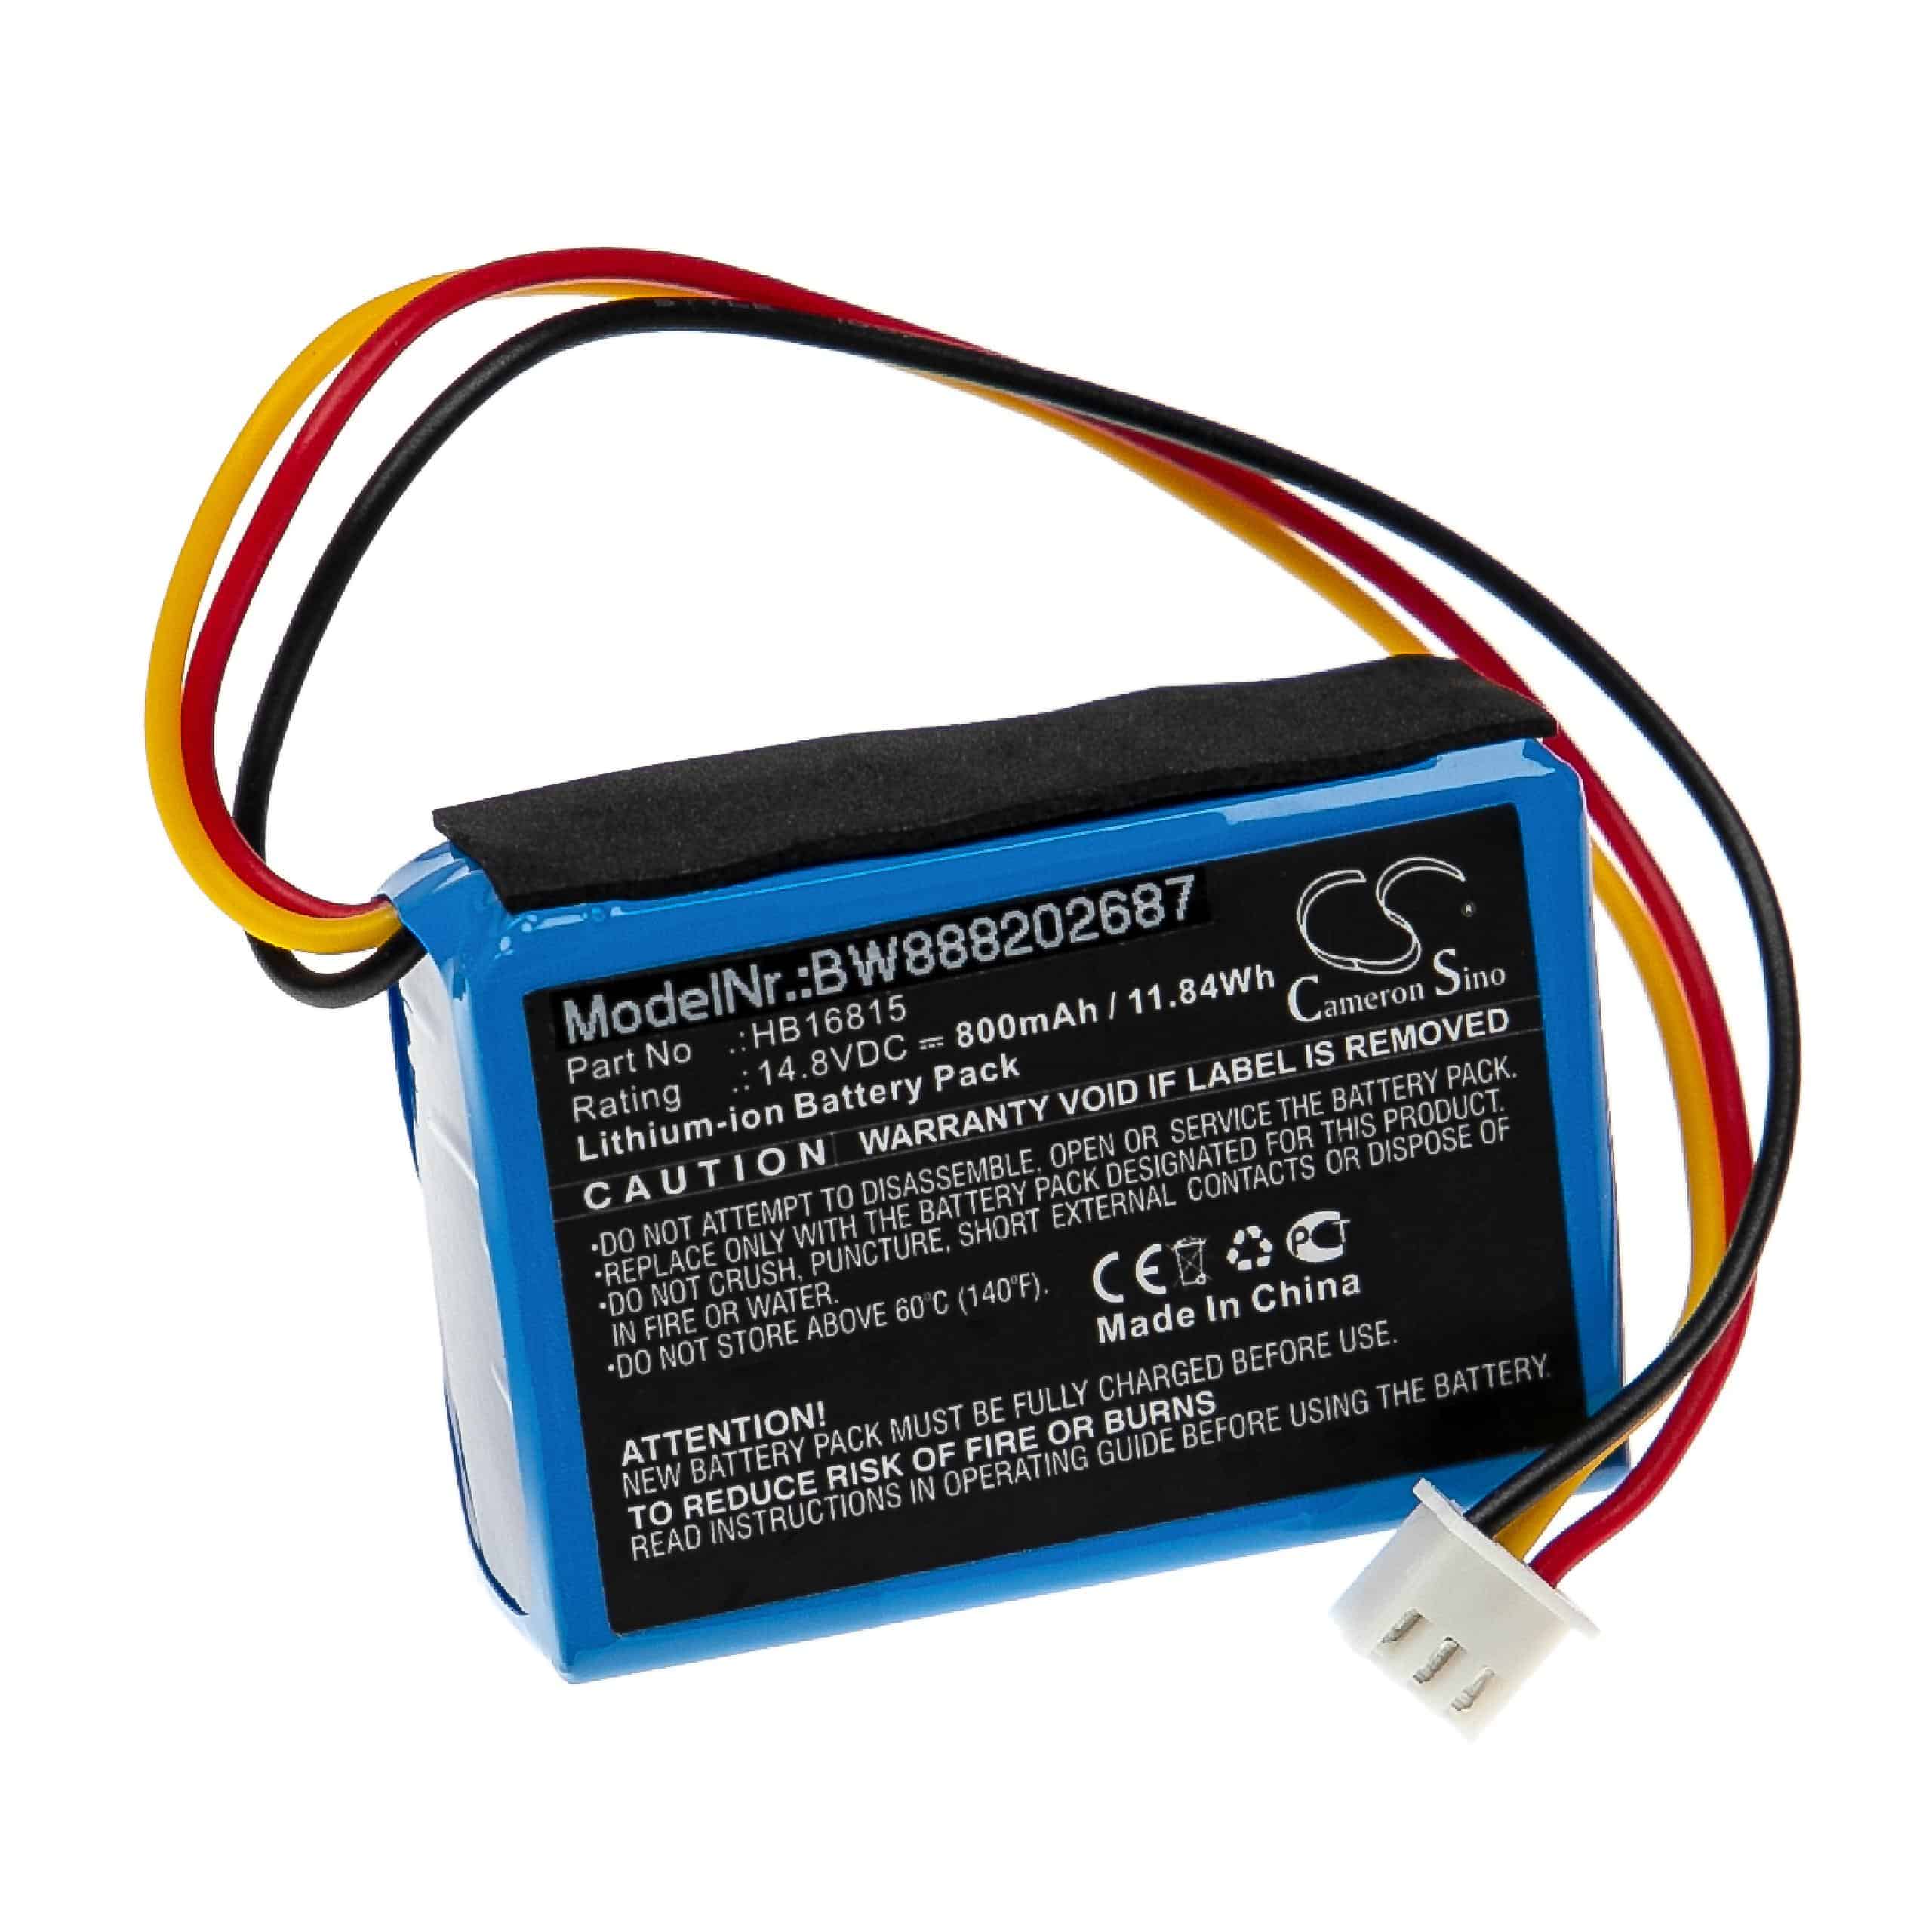 Battery Replacement for Hobot HB16815 for - 800mAh, 14.8V, Li-Ion